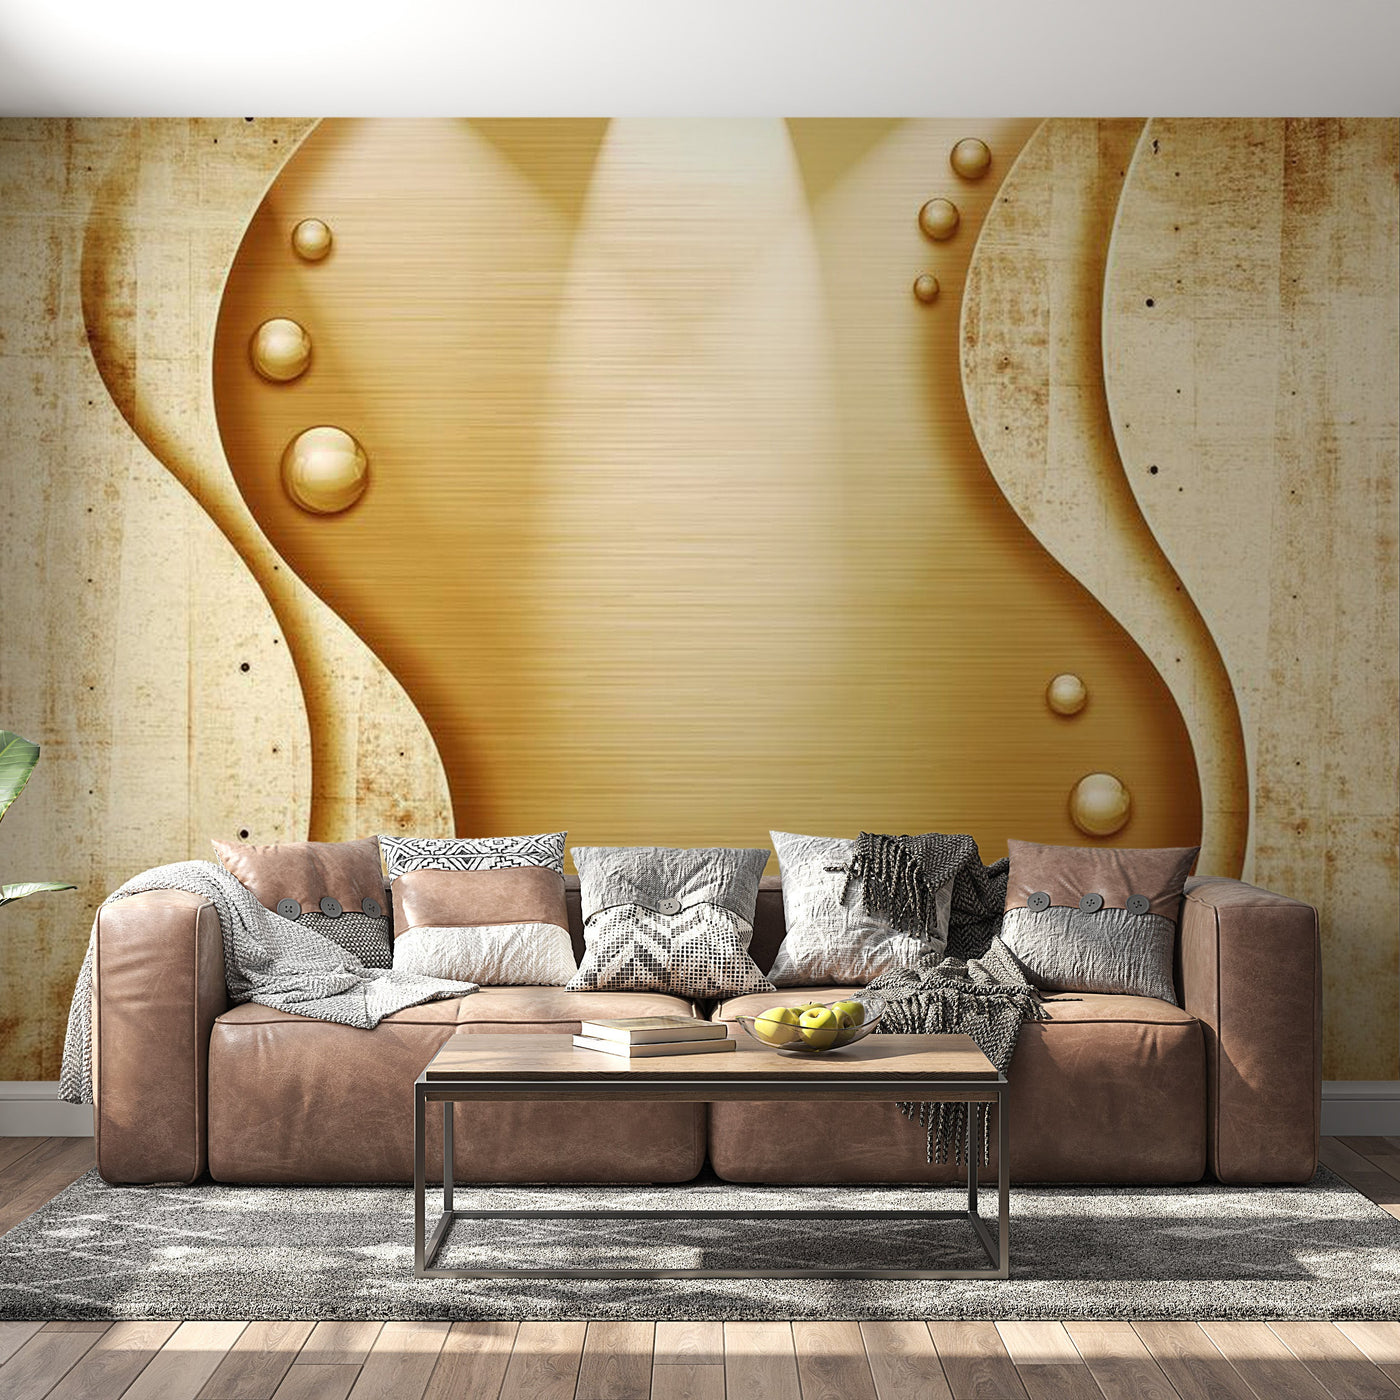 Peel & Stick Wall Mural - Golden Concrete Metal Fantasy - Removable Wall Decals